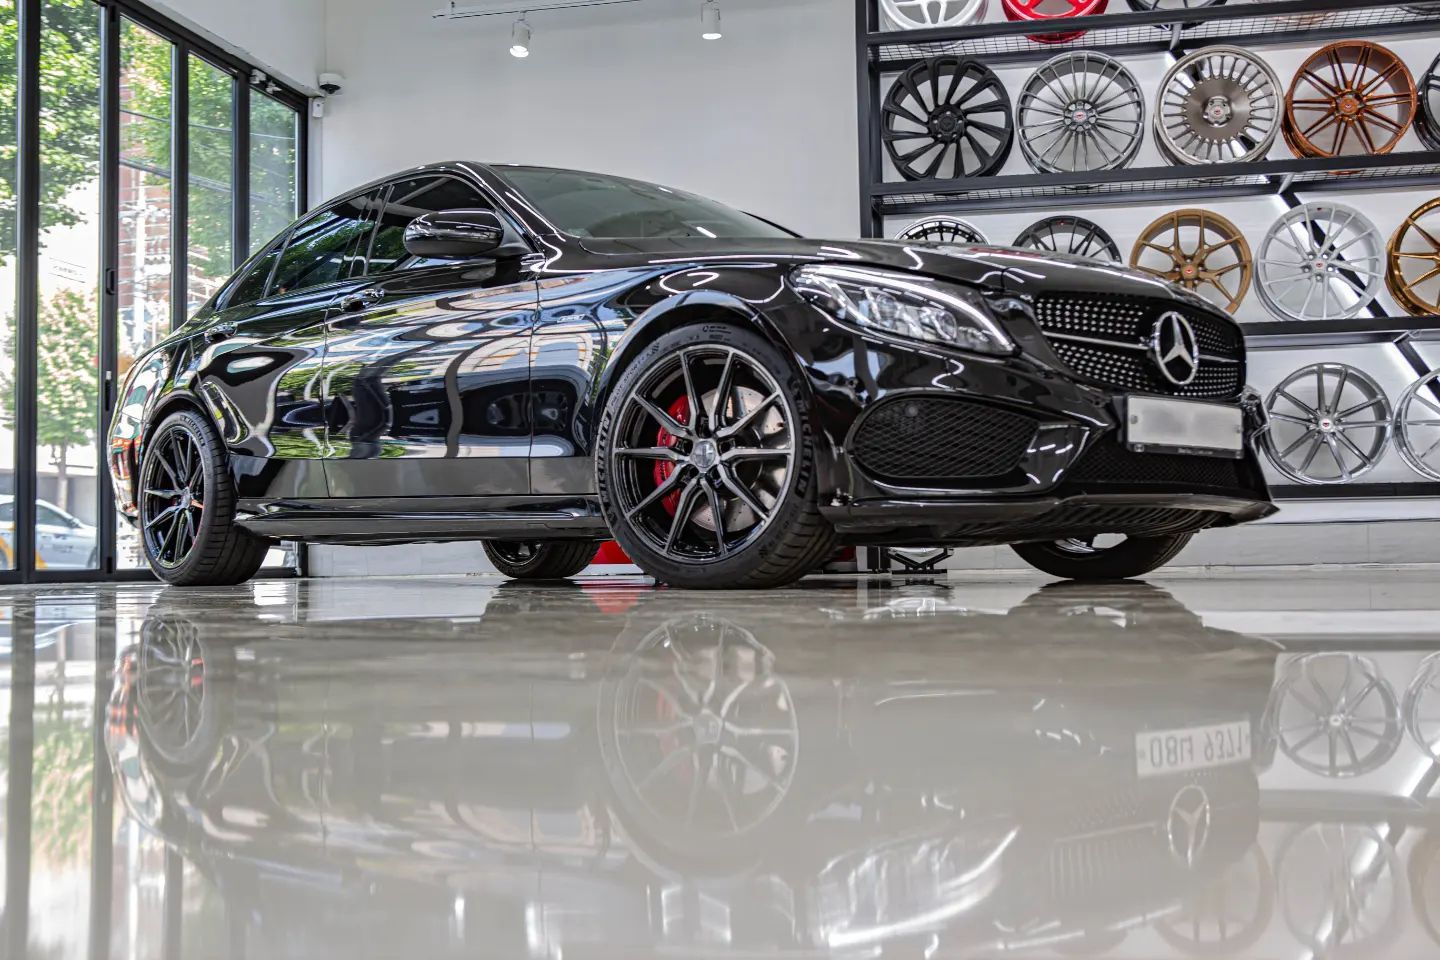 Mercedes-Benz C43 AMG W205 with 19×8.5 and 19×9.5-inch Vossen HF-3